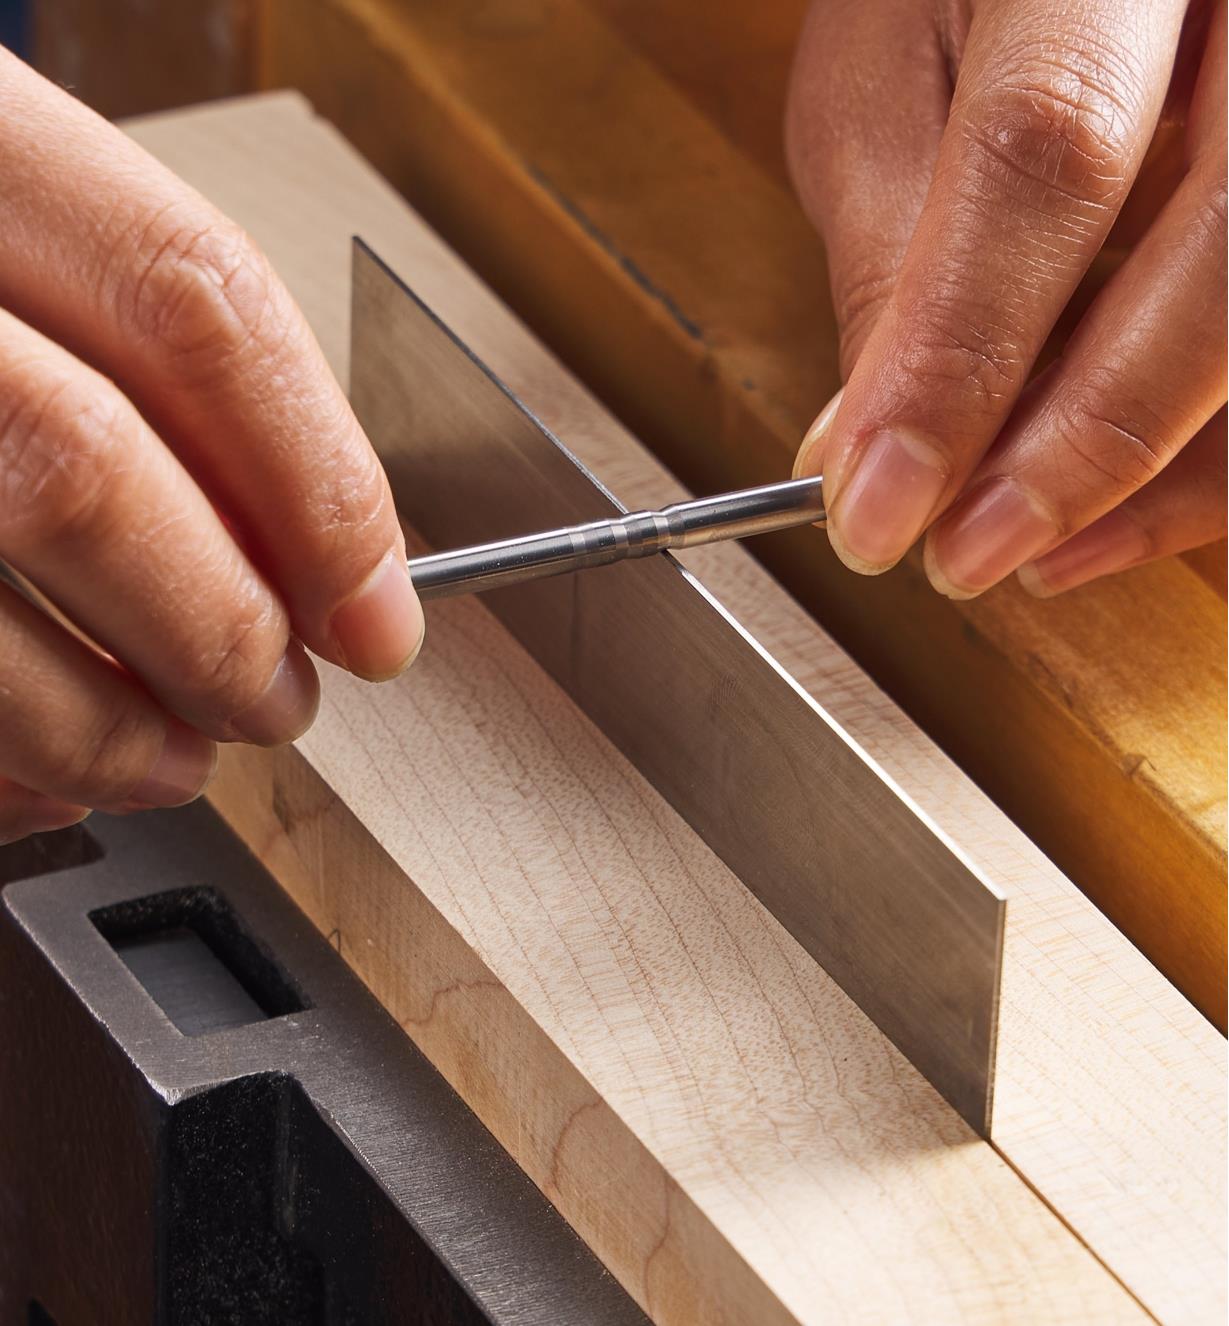 Using a burnishing rod to burnish 15° hooks on the edge of a straight scraper clamped in a vise